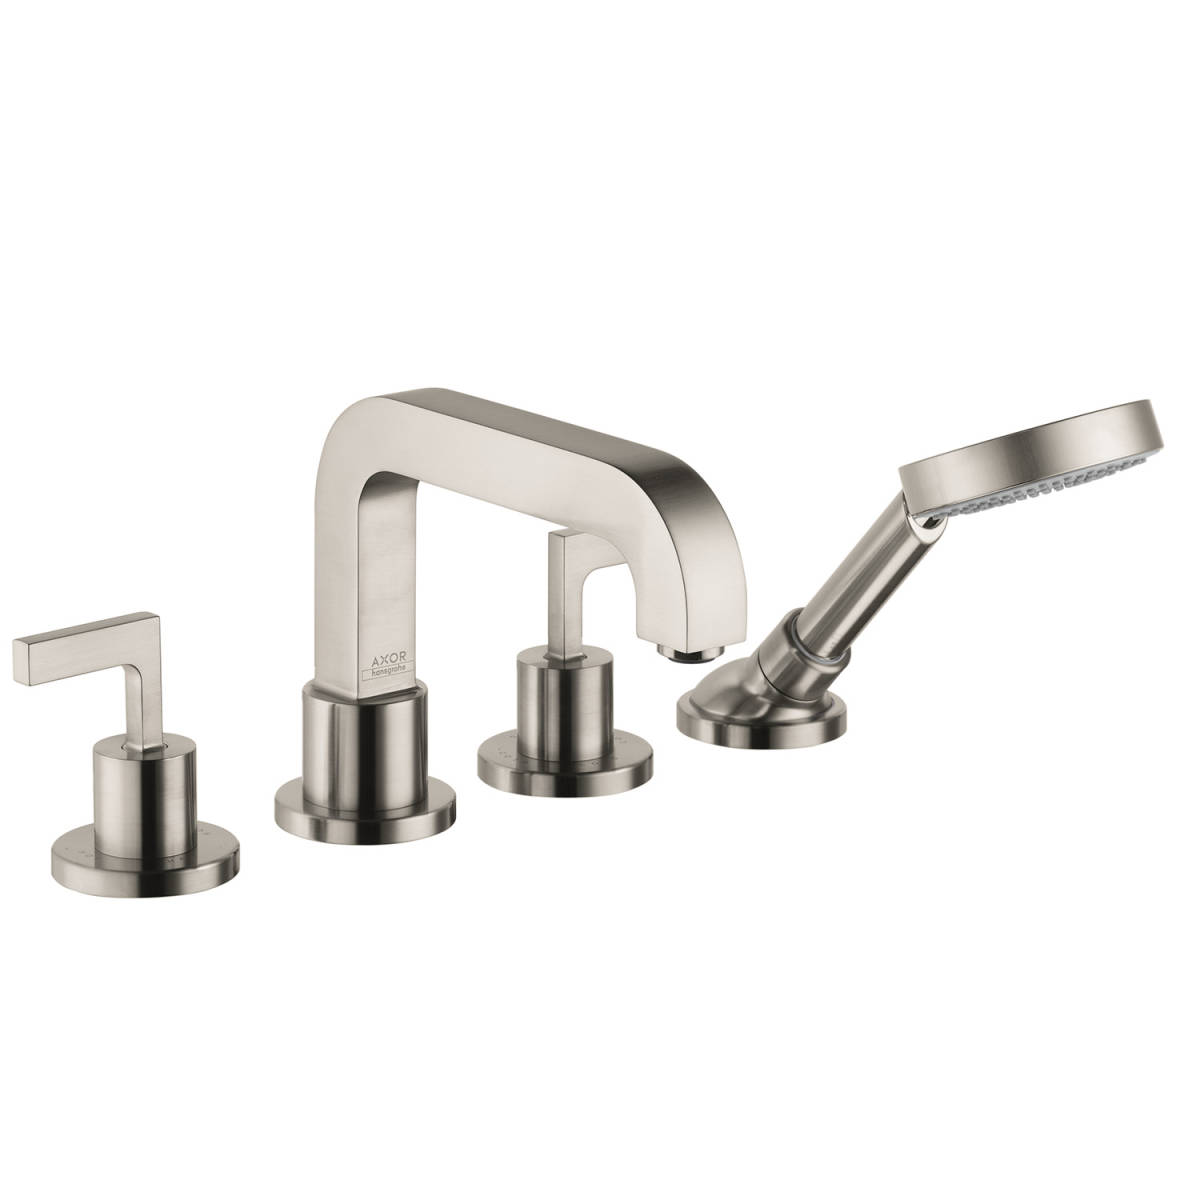 Axor Citterio Bath Faucets 2 Functions Brushed Nickel 39462821